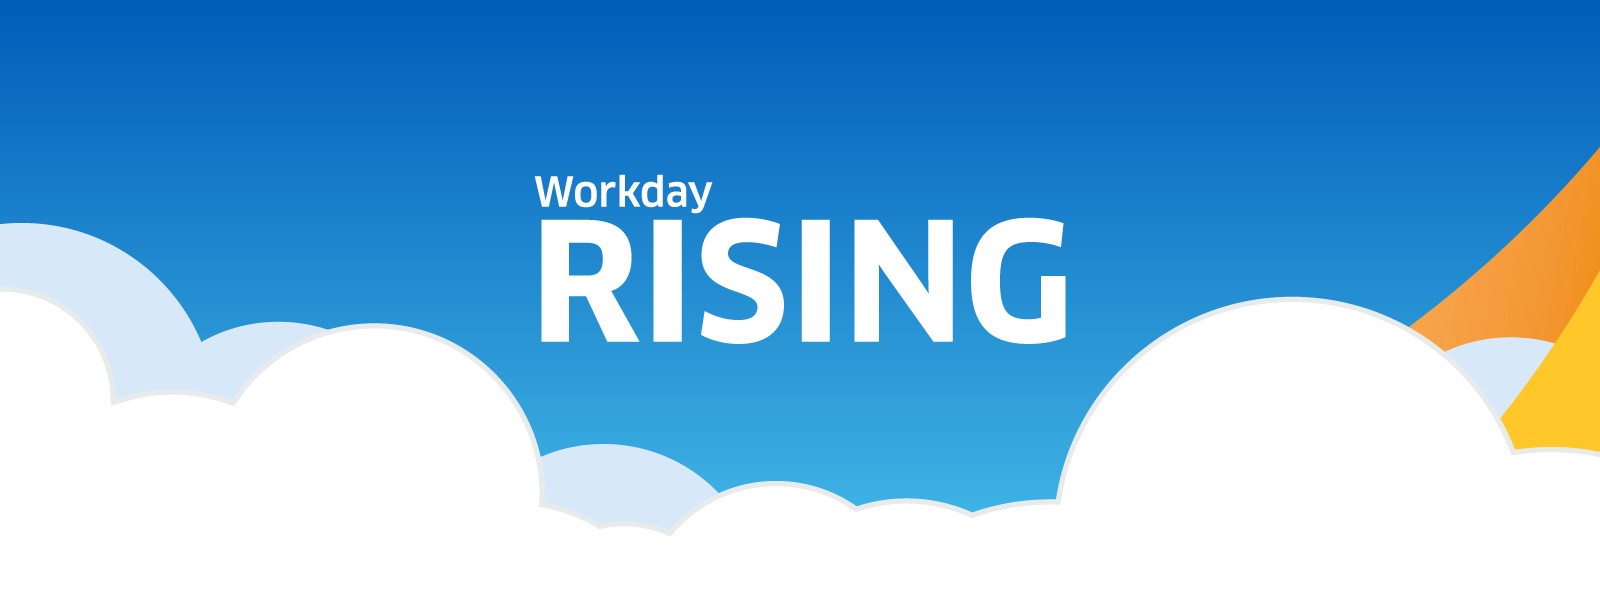 Workday Rising Moves to One Global, Digital Experience for 2020